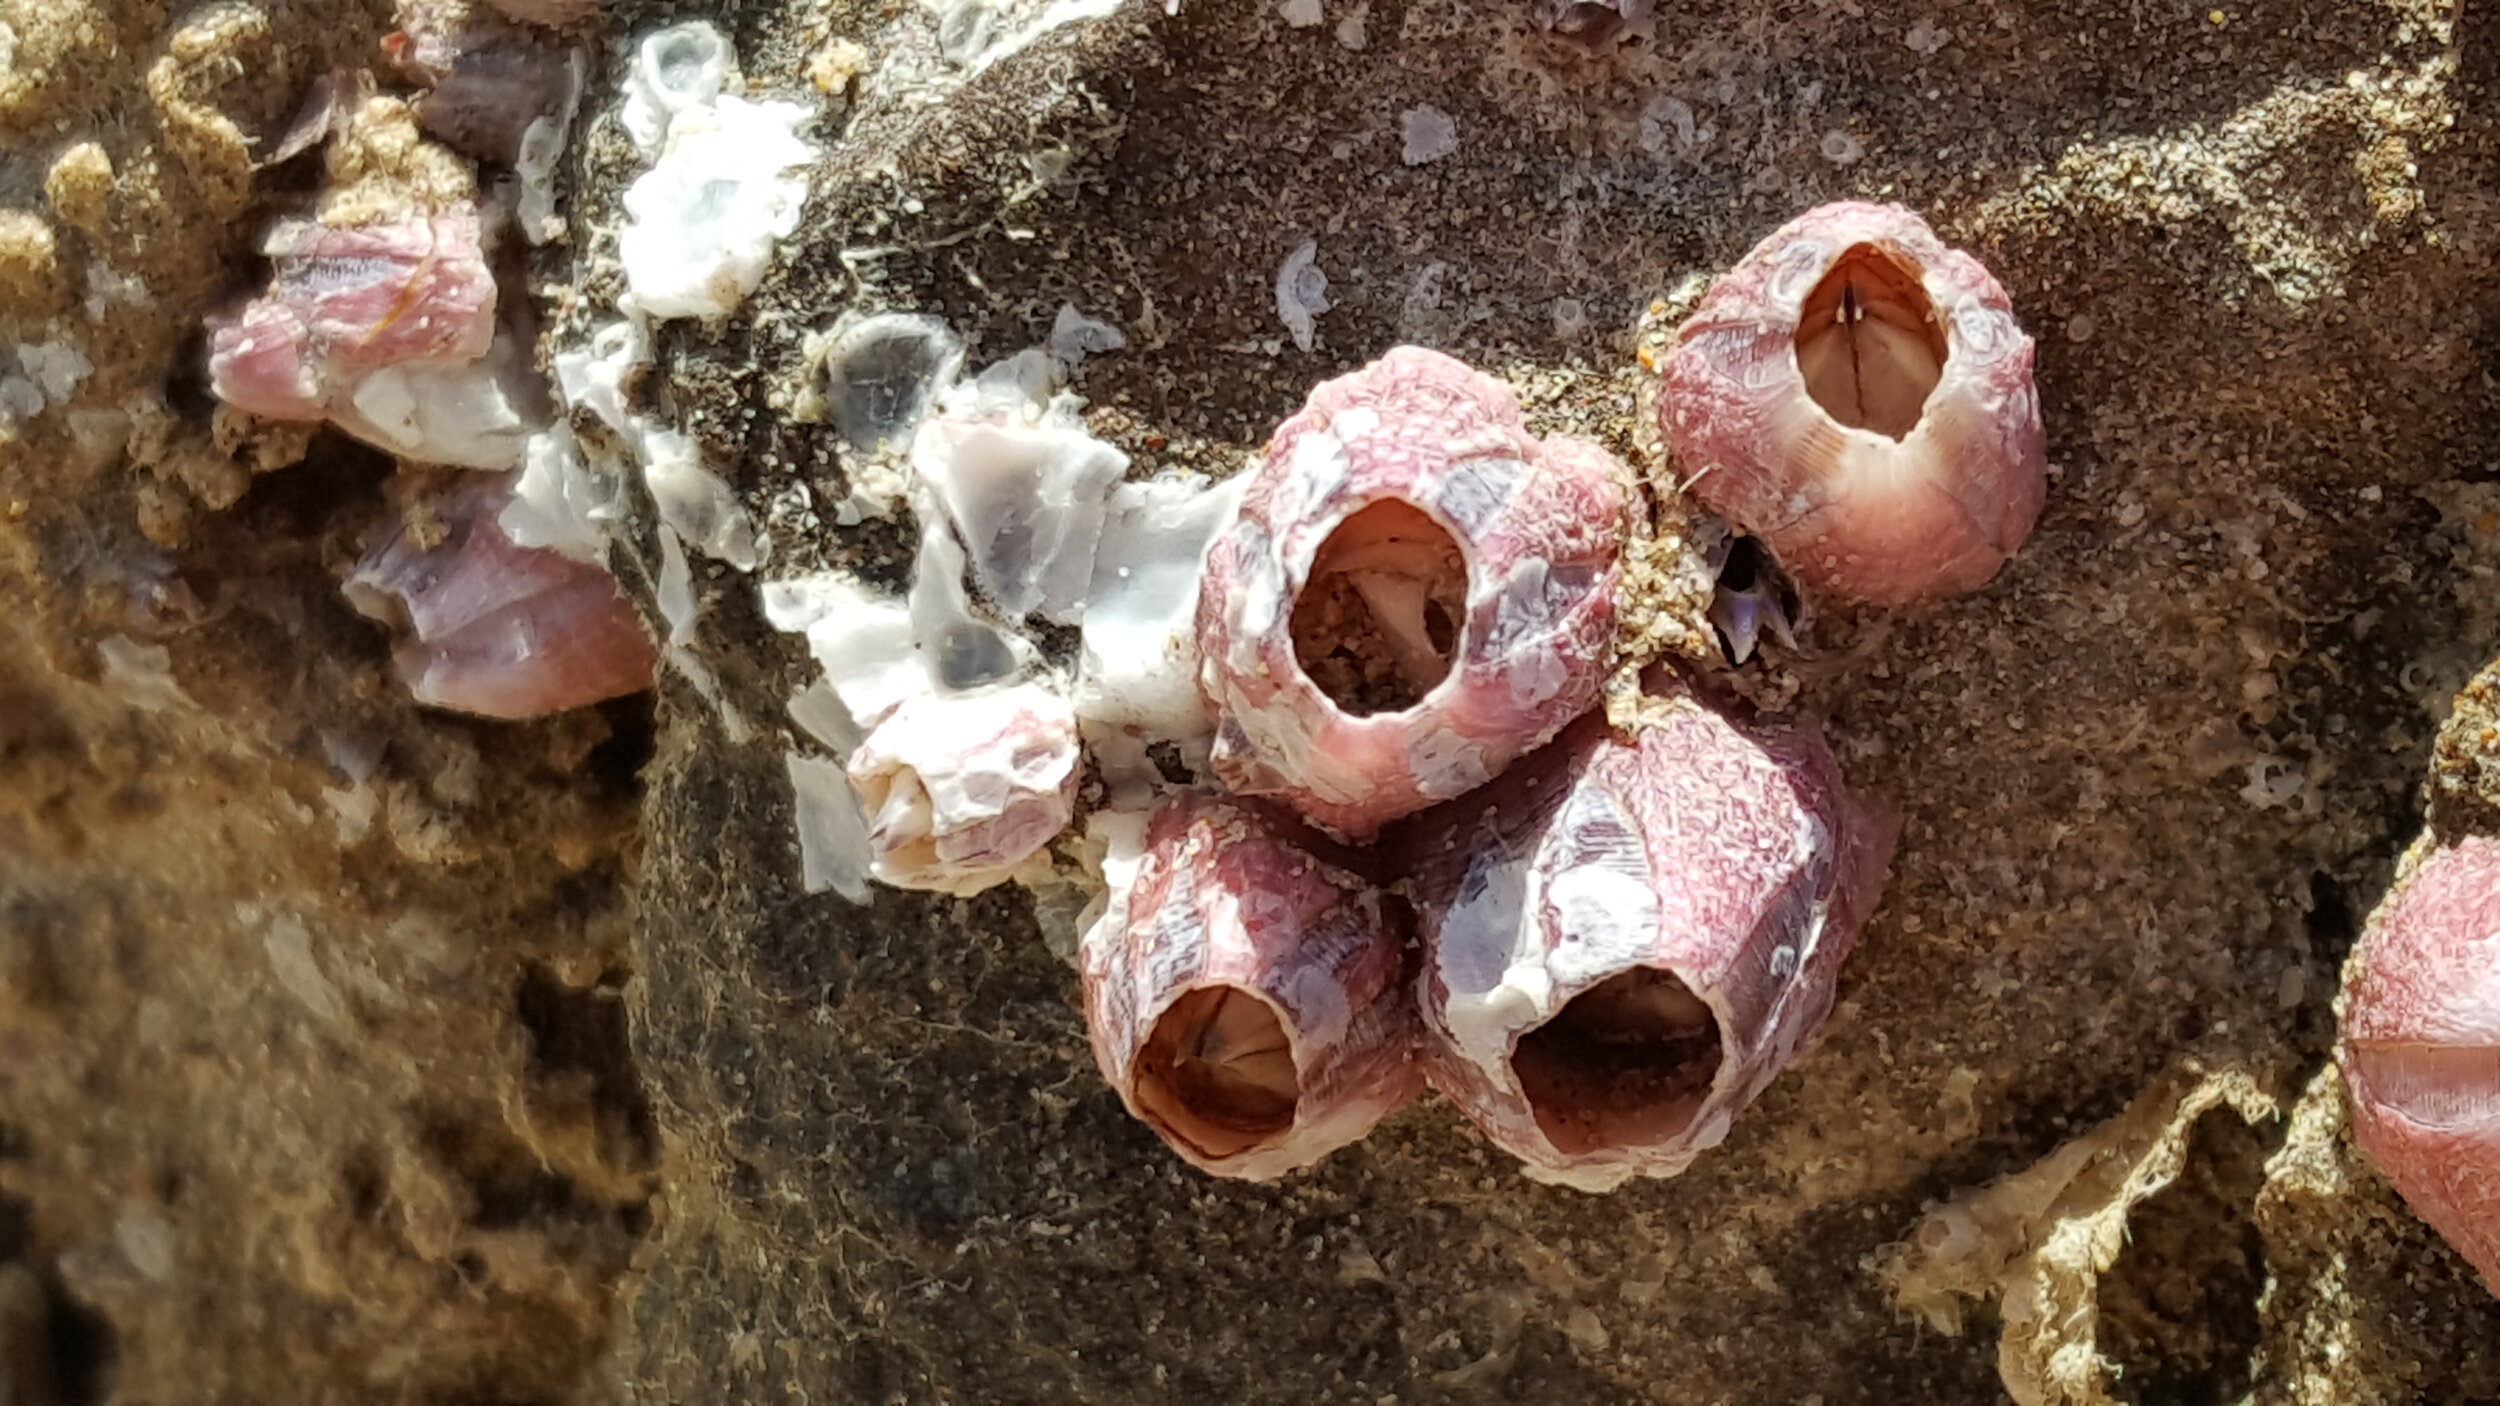  Barnacles. For the full story see our news page here: https://www.thewhitebluffproject.co/news/2021/1/16/rare-find-inspires-art-project 